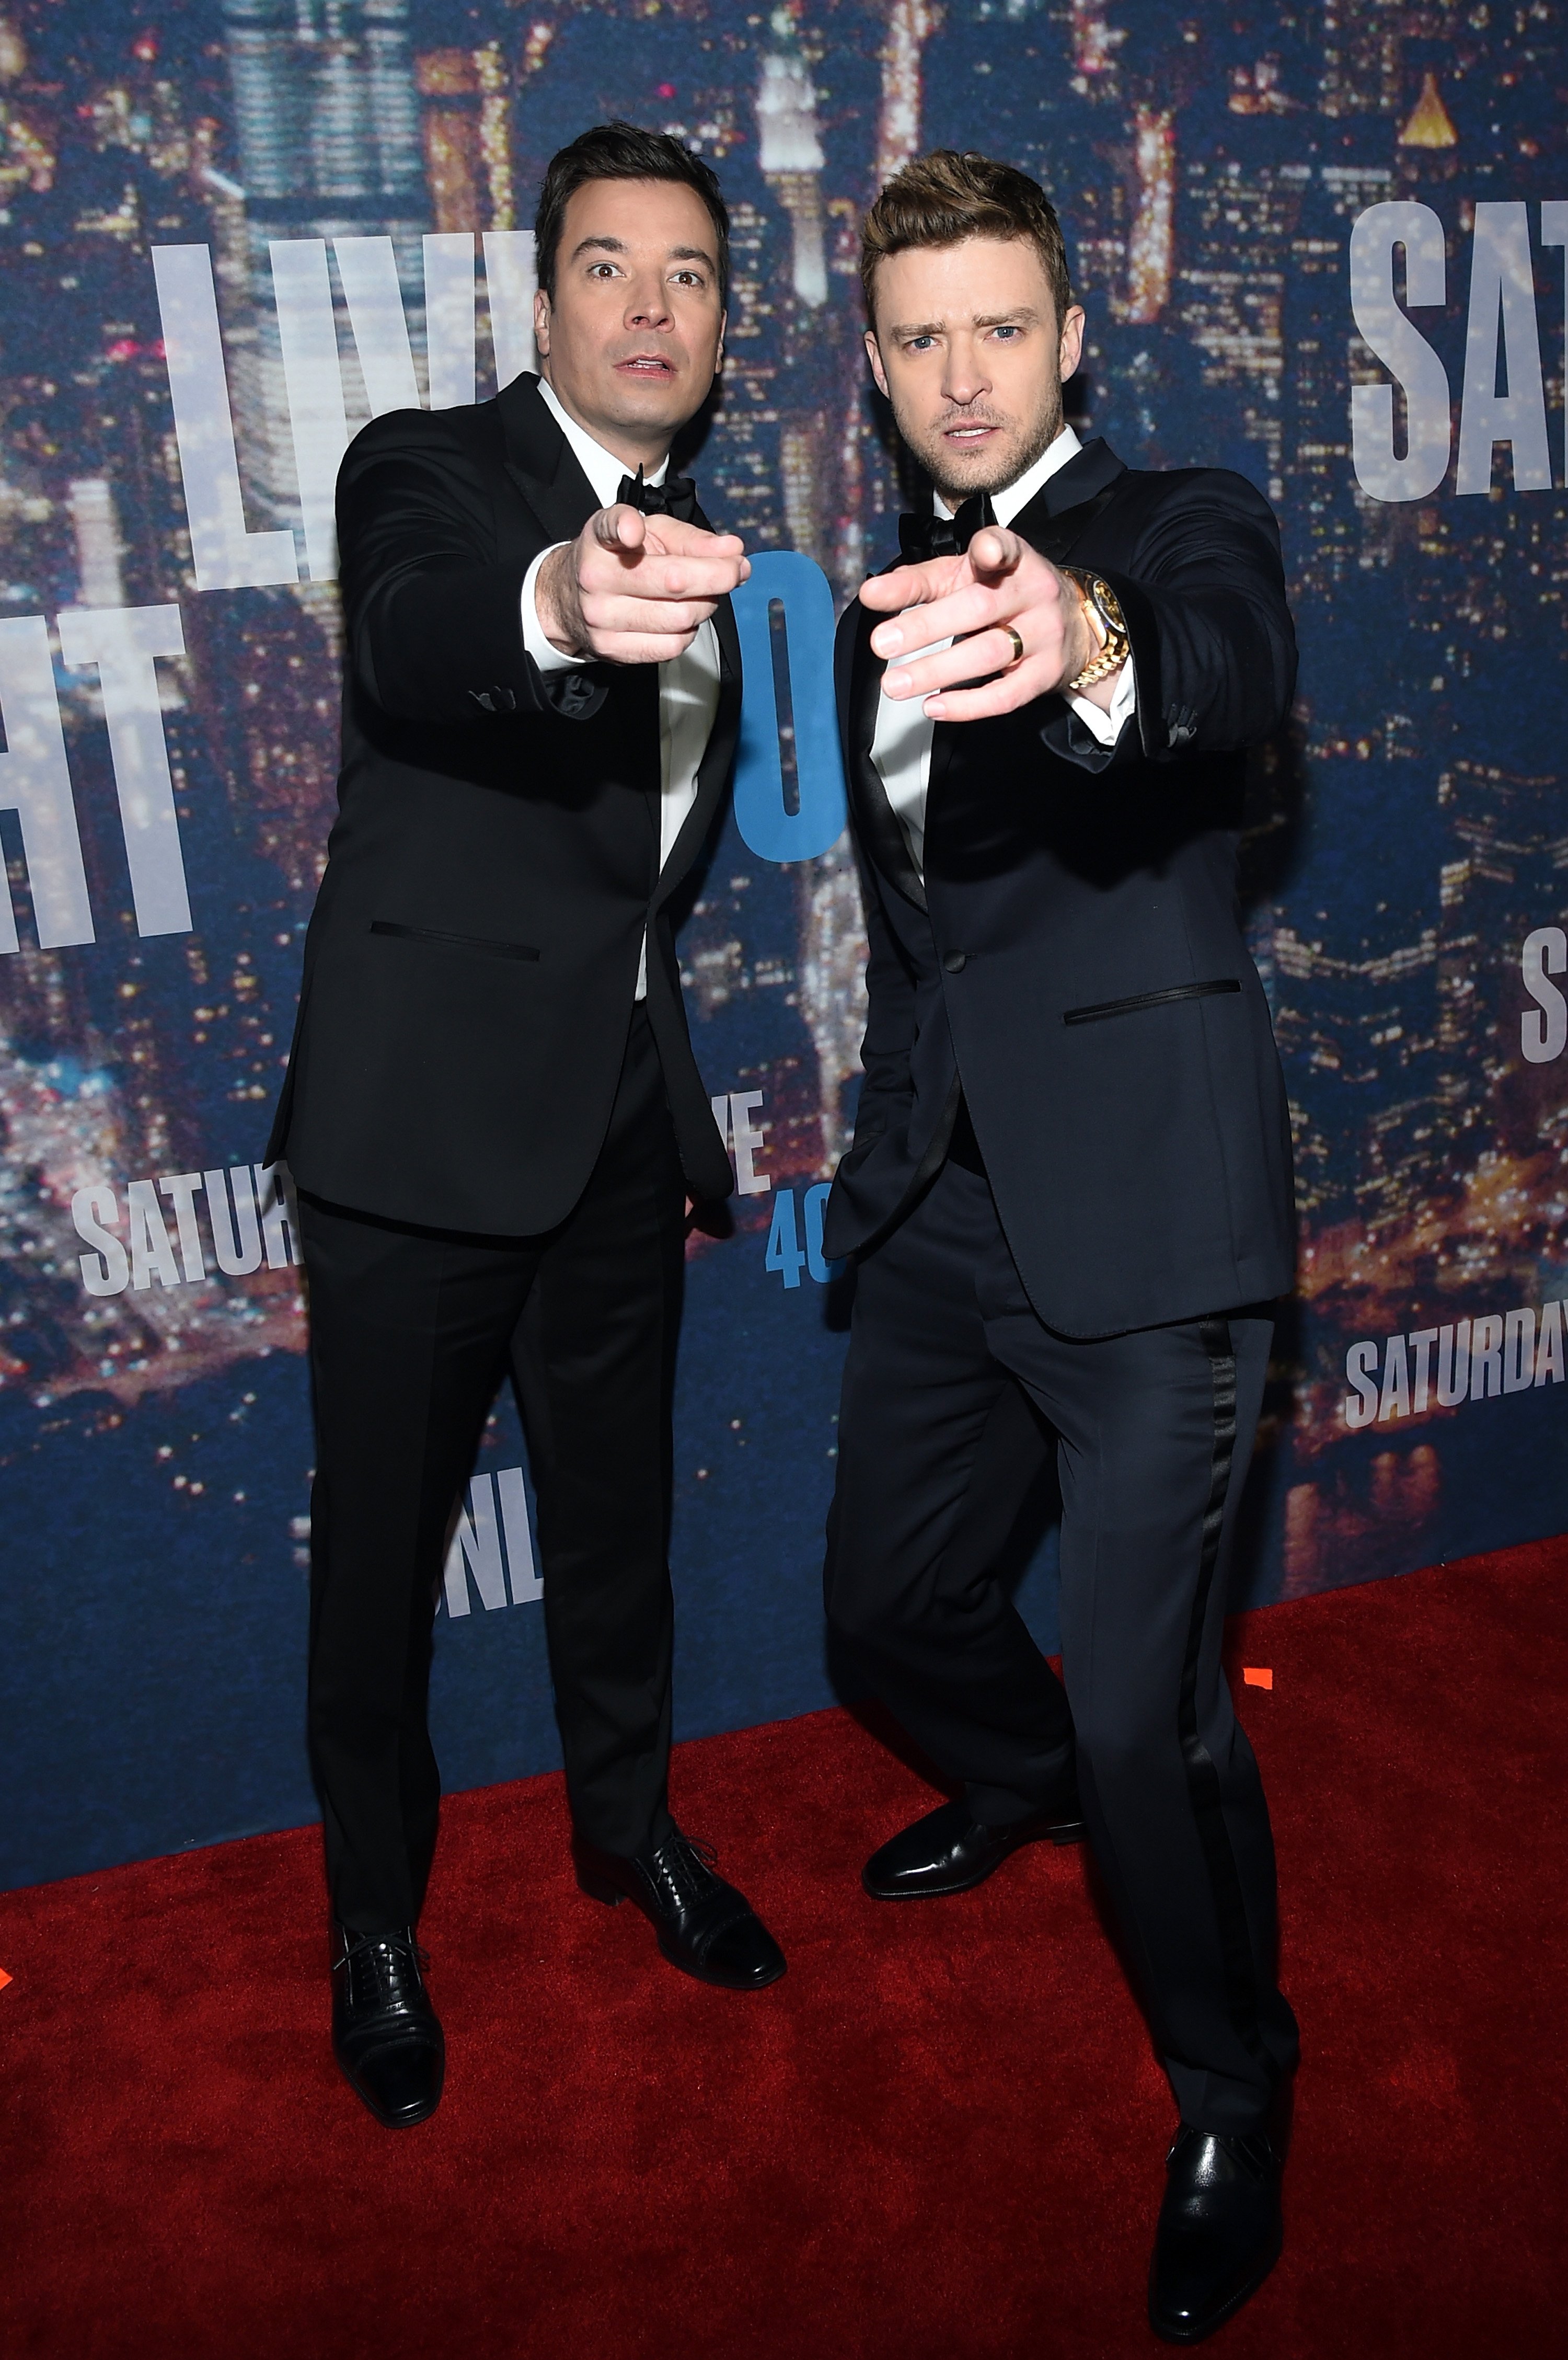 Jimmy Fallon (L) and Justin Timberlake attend SNL 40th Anniversary Celebration at Rockefeller Plaza on February 15, 2015 in New York City | Photo: Getty Images